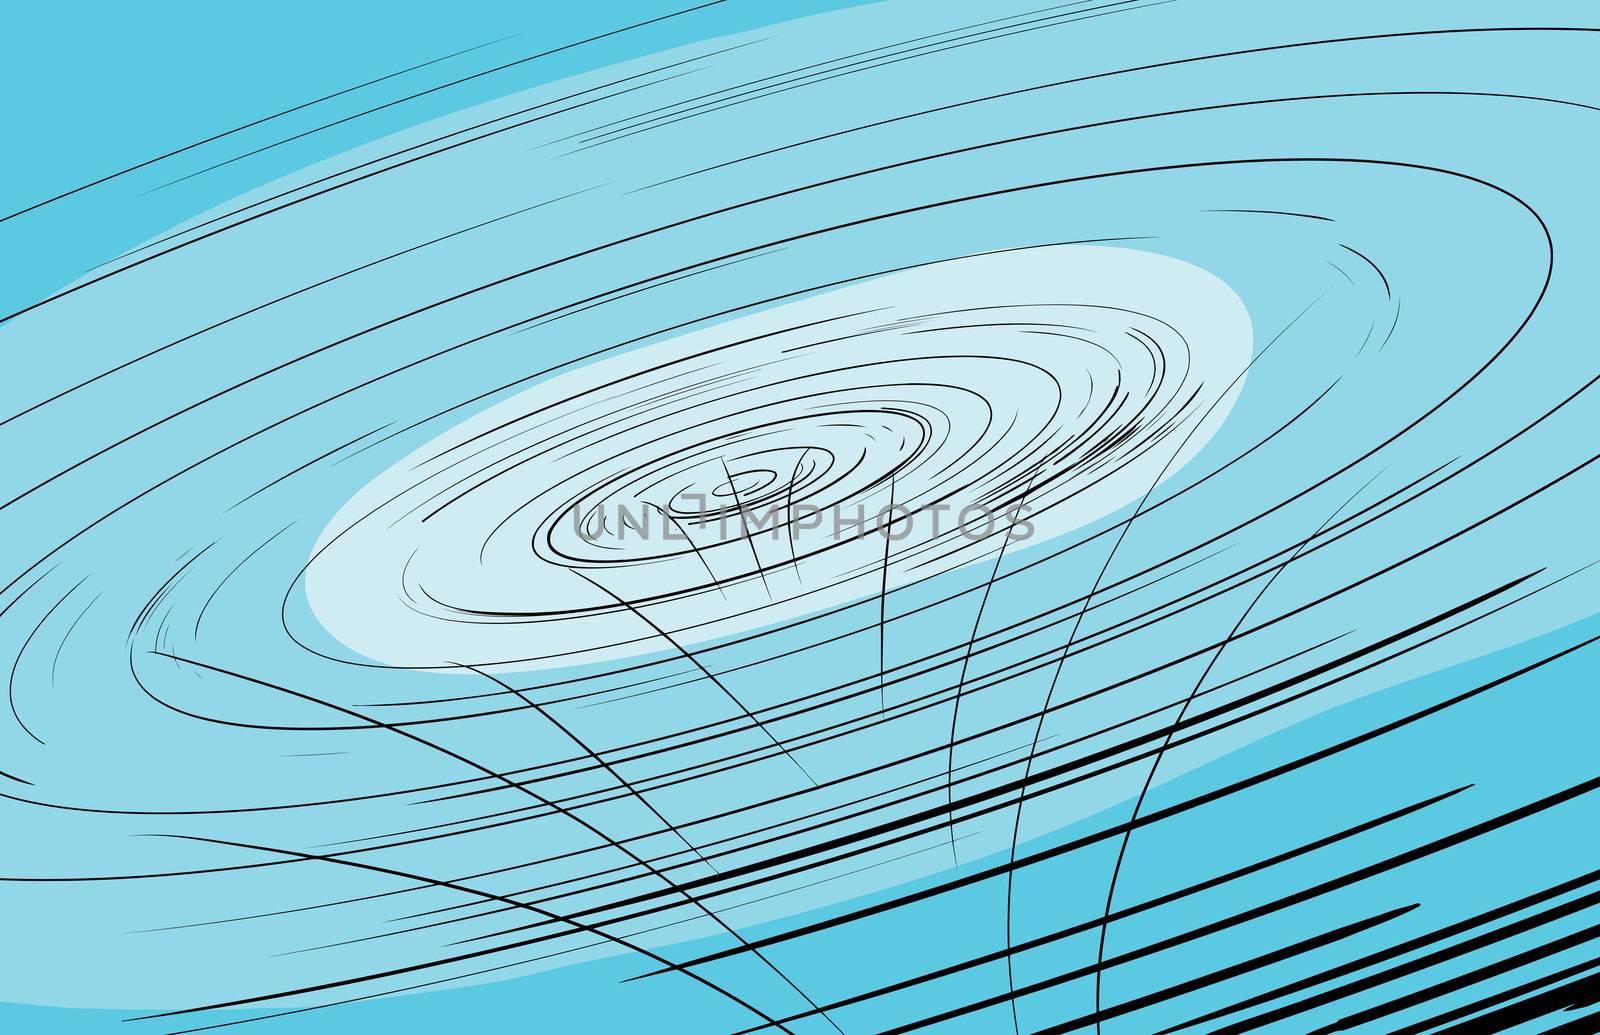 Abstract hurricane funnel and spiral illustration in blue